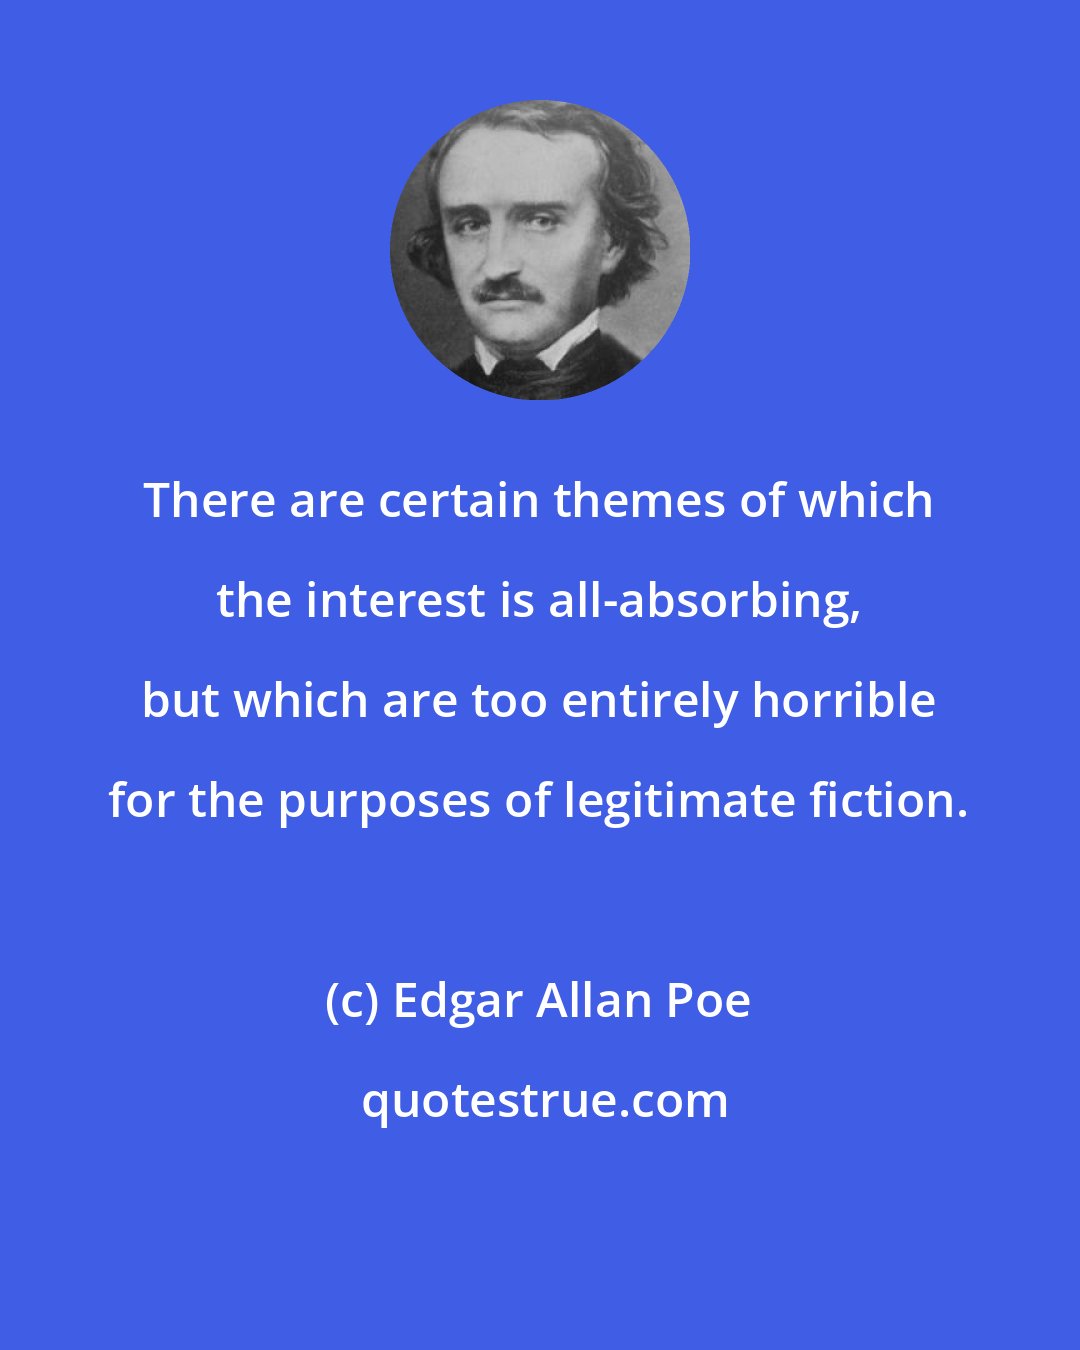 Edgar Allan Poe: There are certain themes of which the interest is all-absorbing, but which are too entirely horrible for the purposes of legitimate fiction.